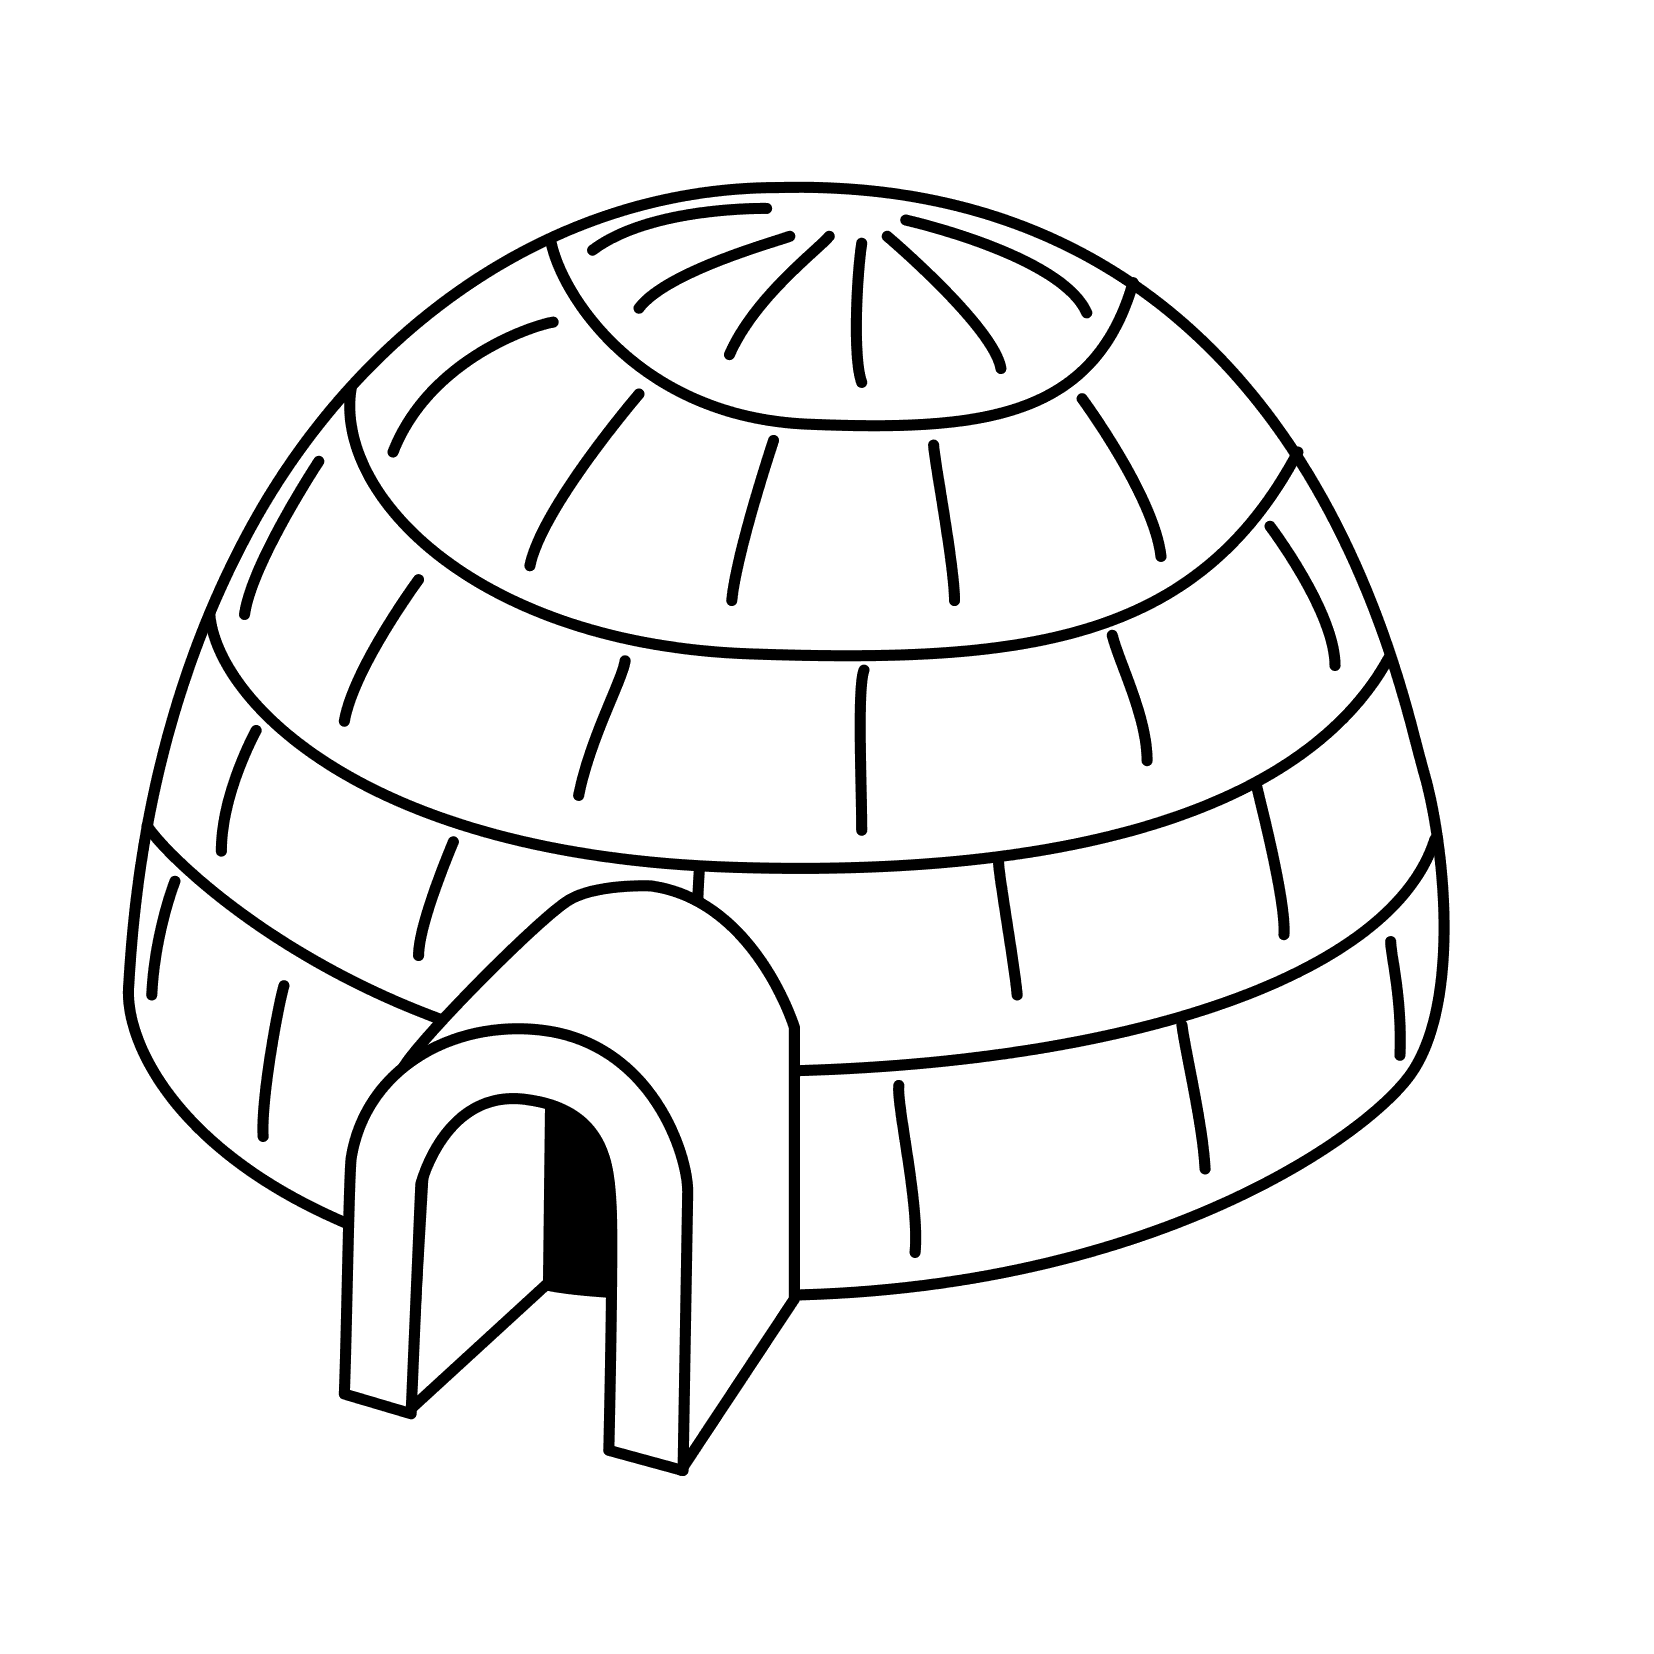 Igloo (Buildings and Architecture) Printable coloring pages